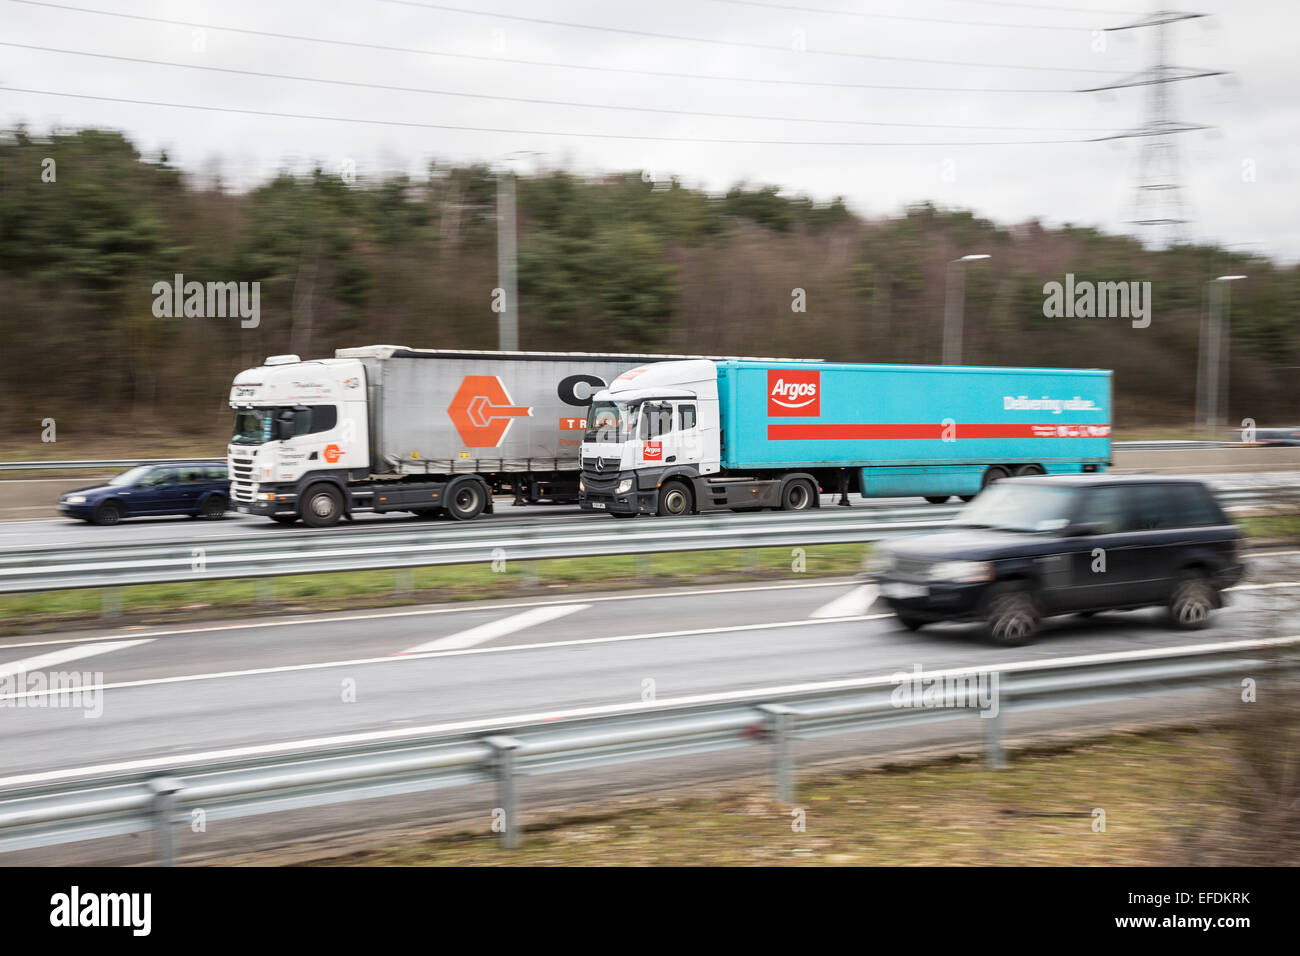 An Argos branded articulated lorry heading westbound on the M25 Motorway close to Junction 26 in Essex, United Kingdom Stock Photo